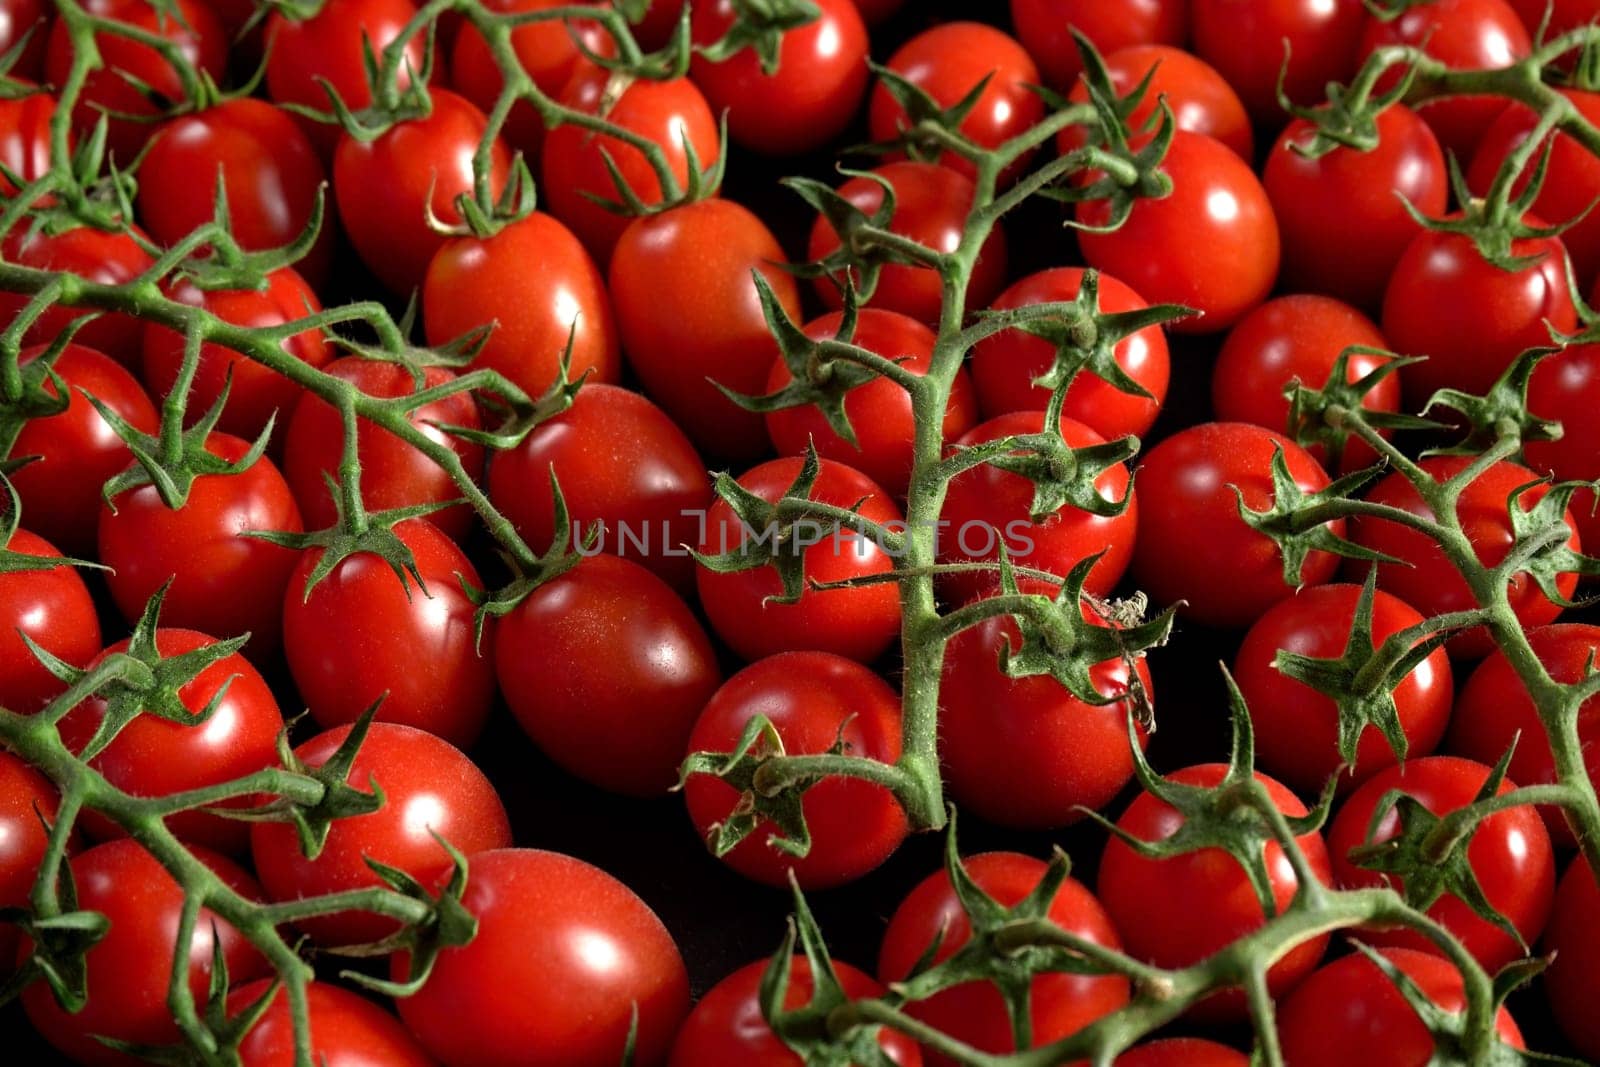 Group of small tomatoes with green stems, view from above by Ivanko